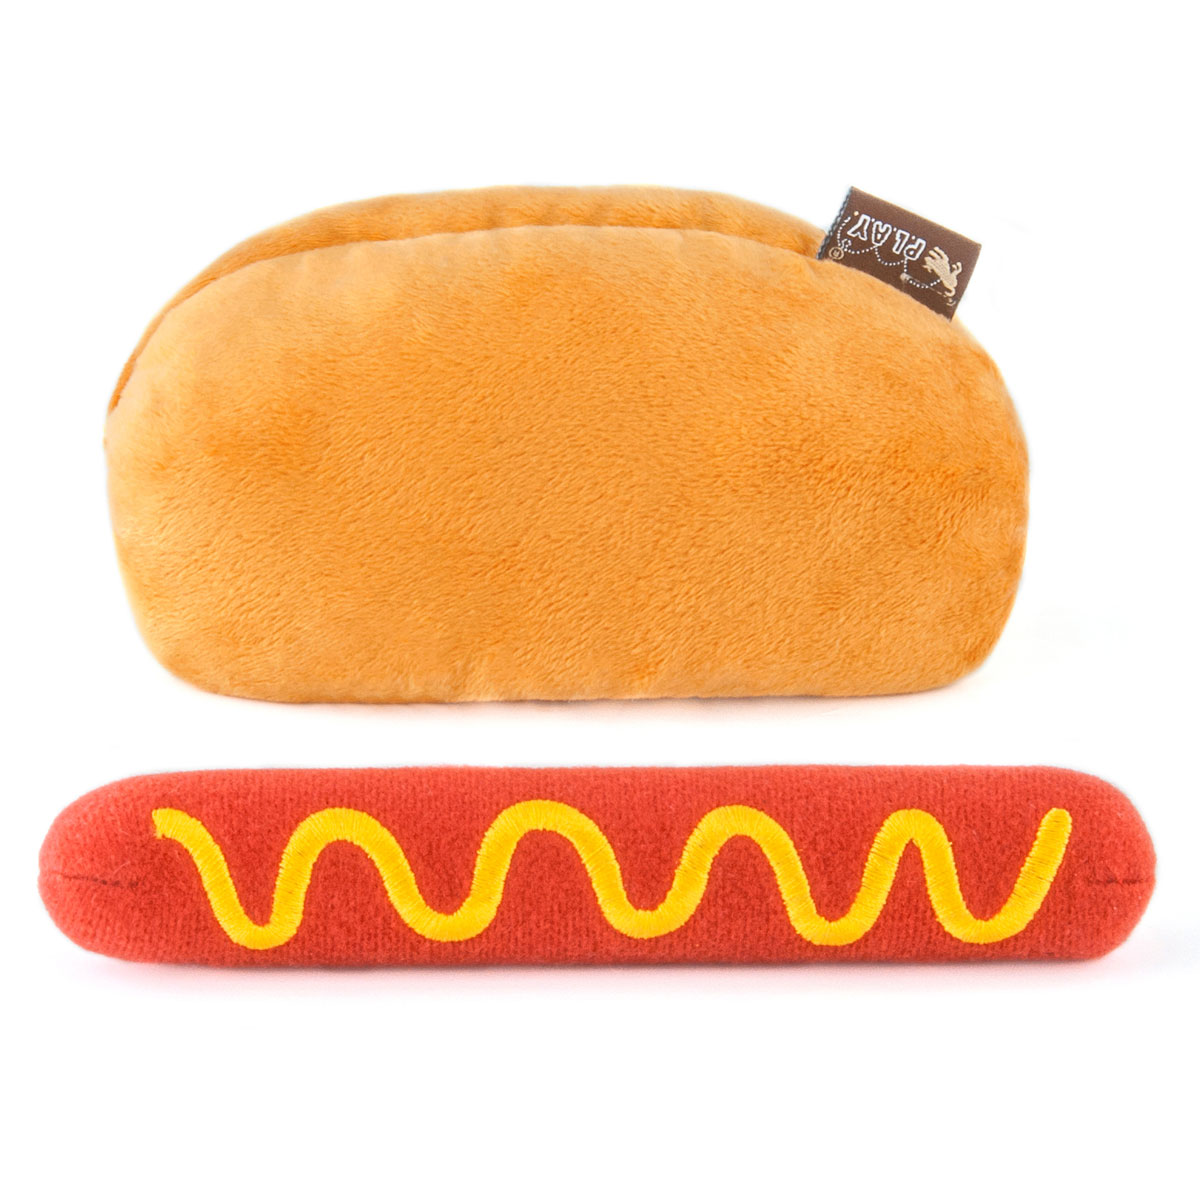 https://halaspaws.com/wp-content/uploads/2021/05/PLAY-American-Classic-Food-Toy-Hot-Dog-seperate.jpg